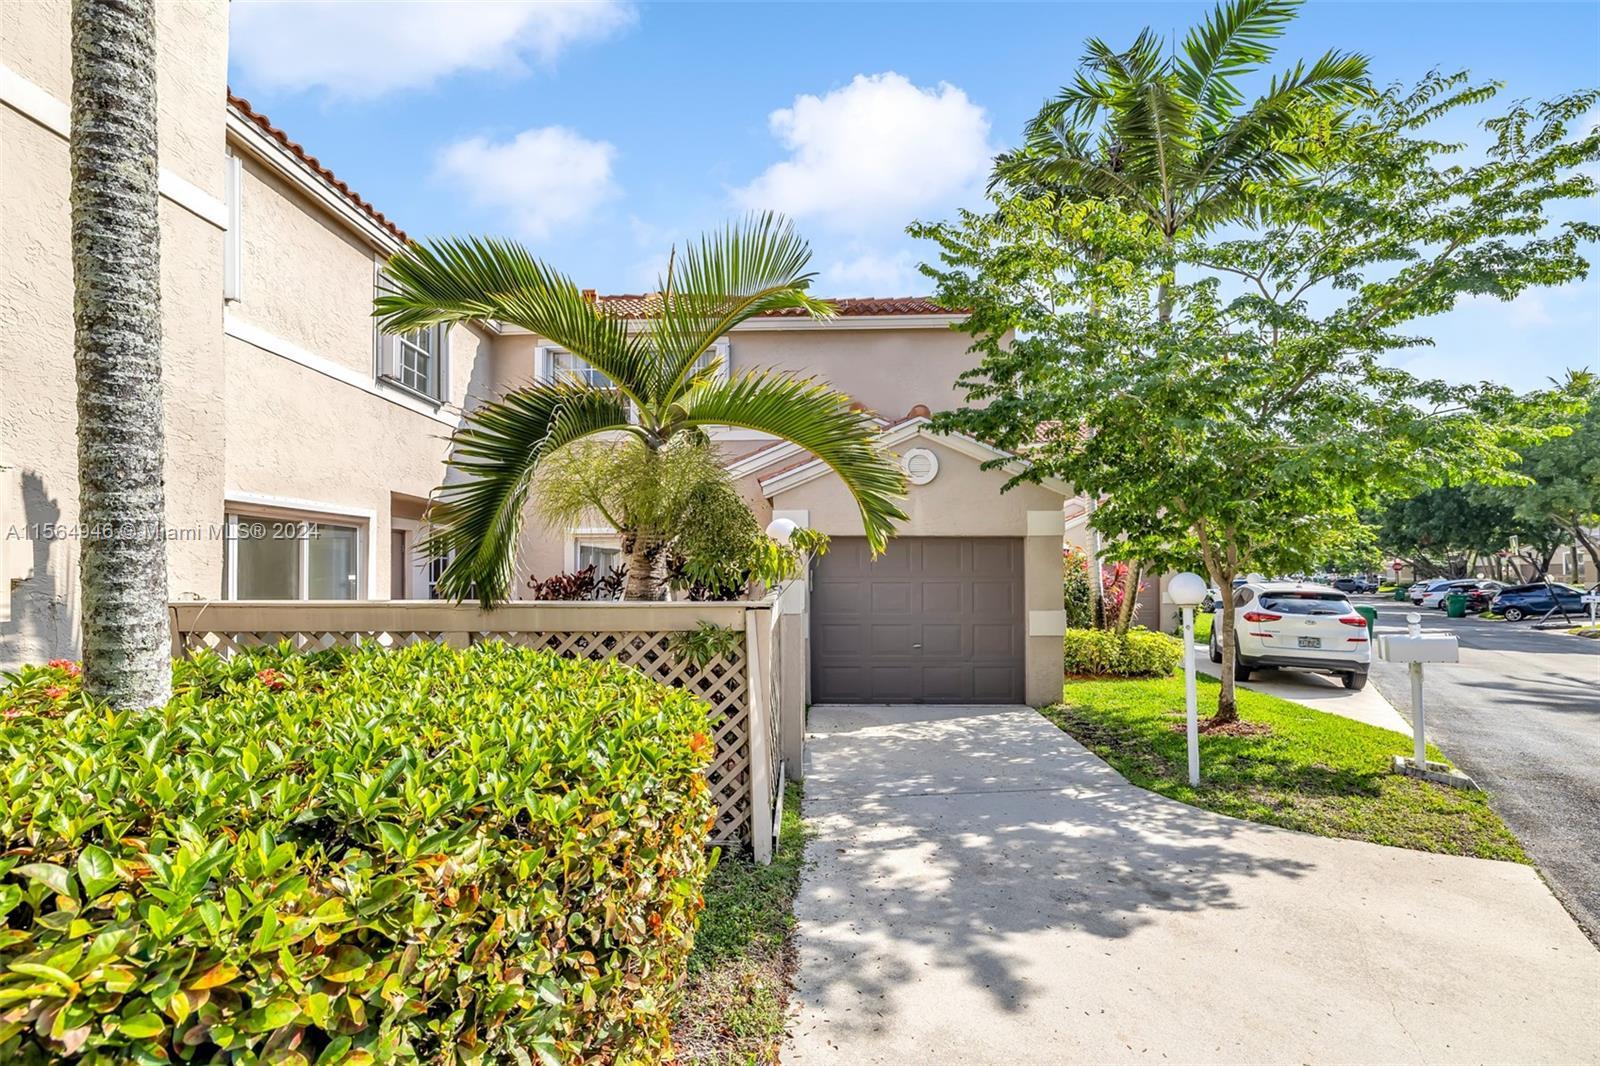 Photo of 11163 Chandler Dr in Cooper City, FL